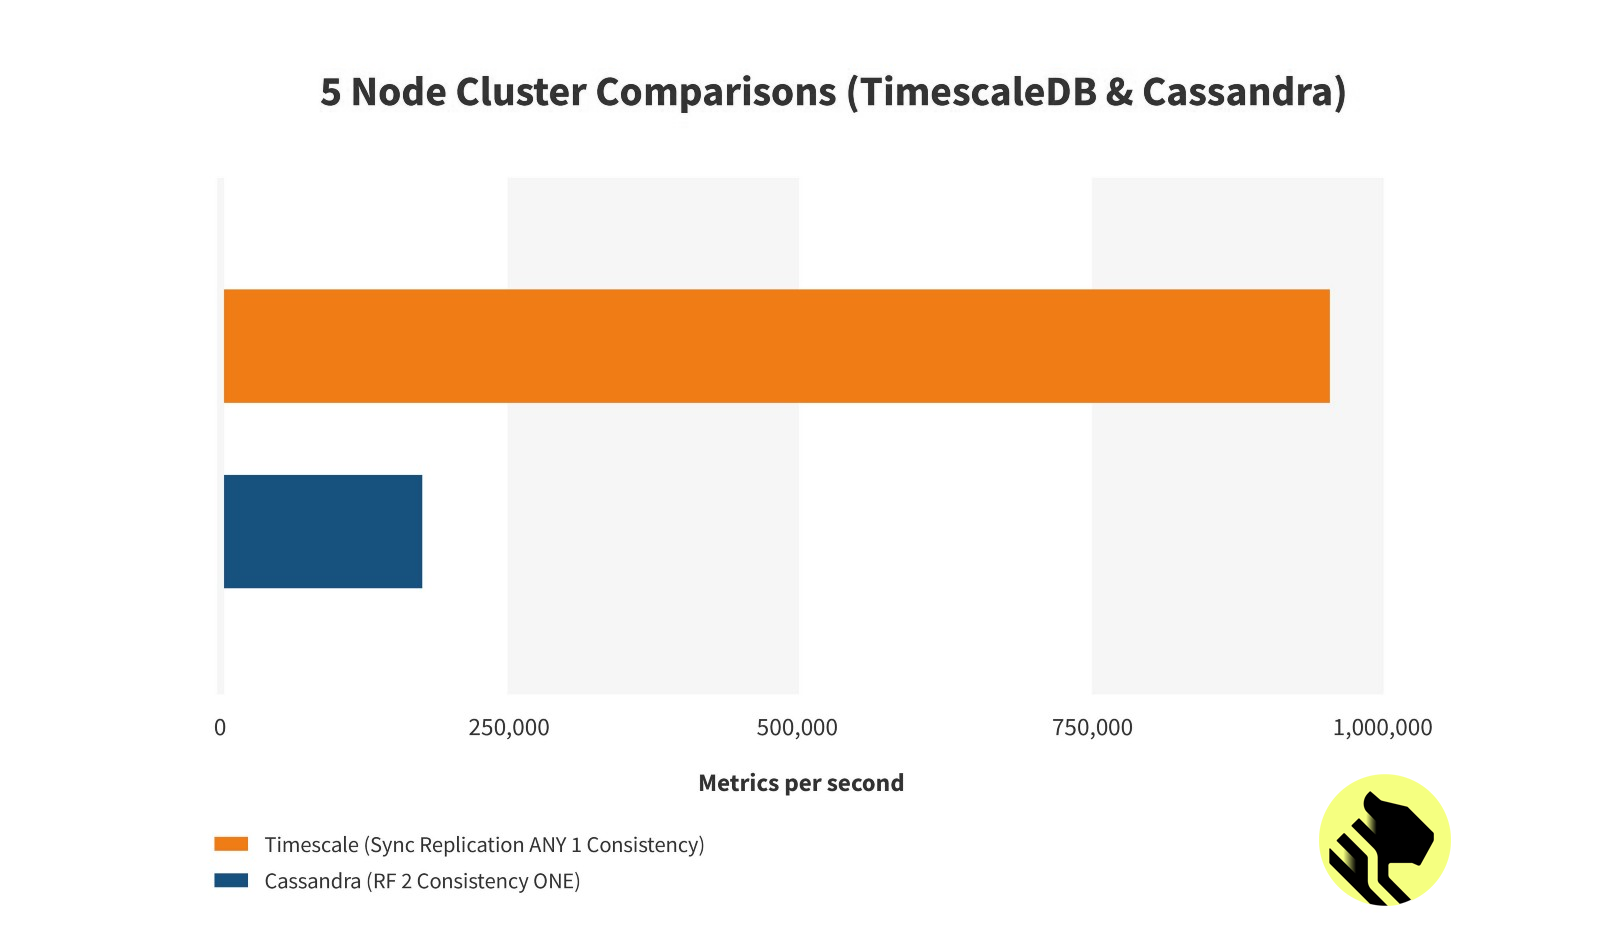 5 TimescaleDB nodes outperforming 5 Cassandra nodes by 5.4x on inserts